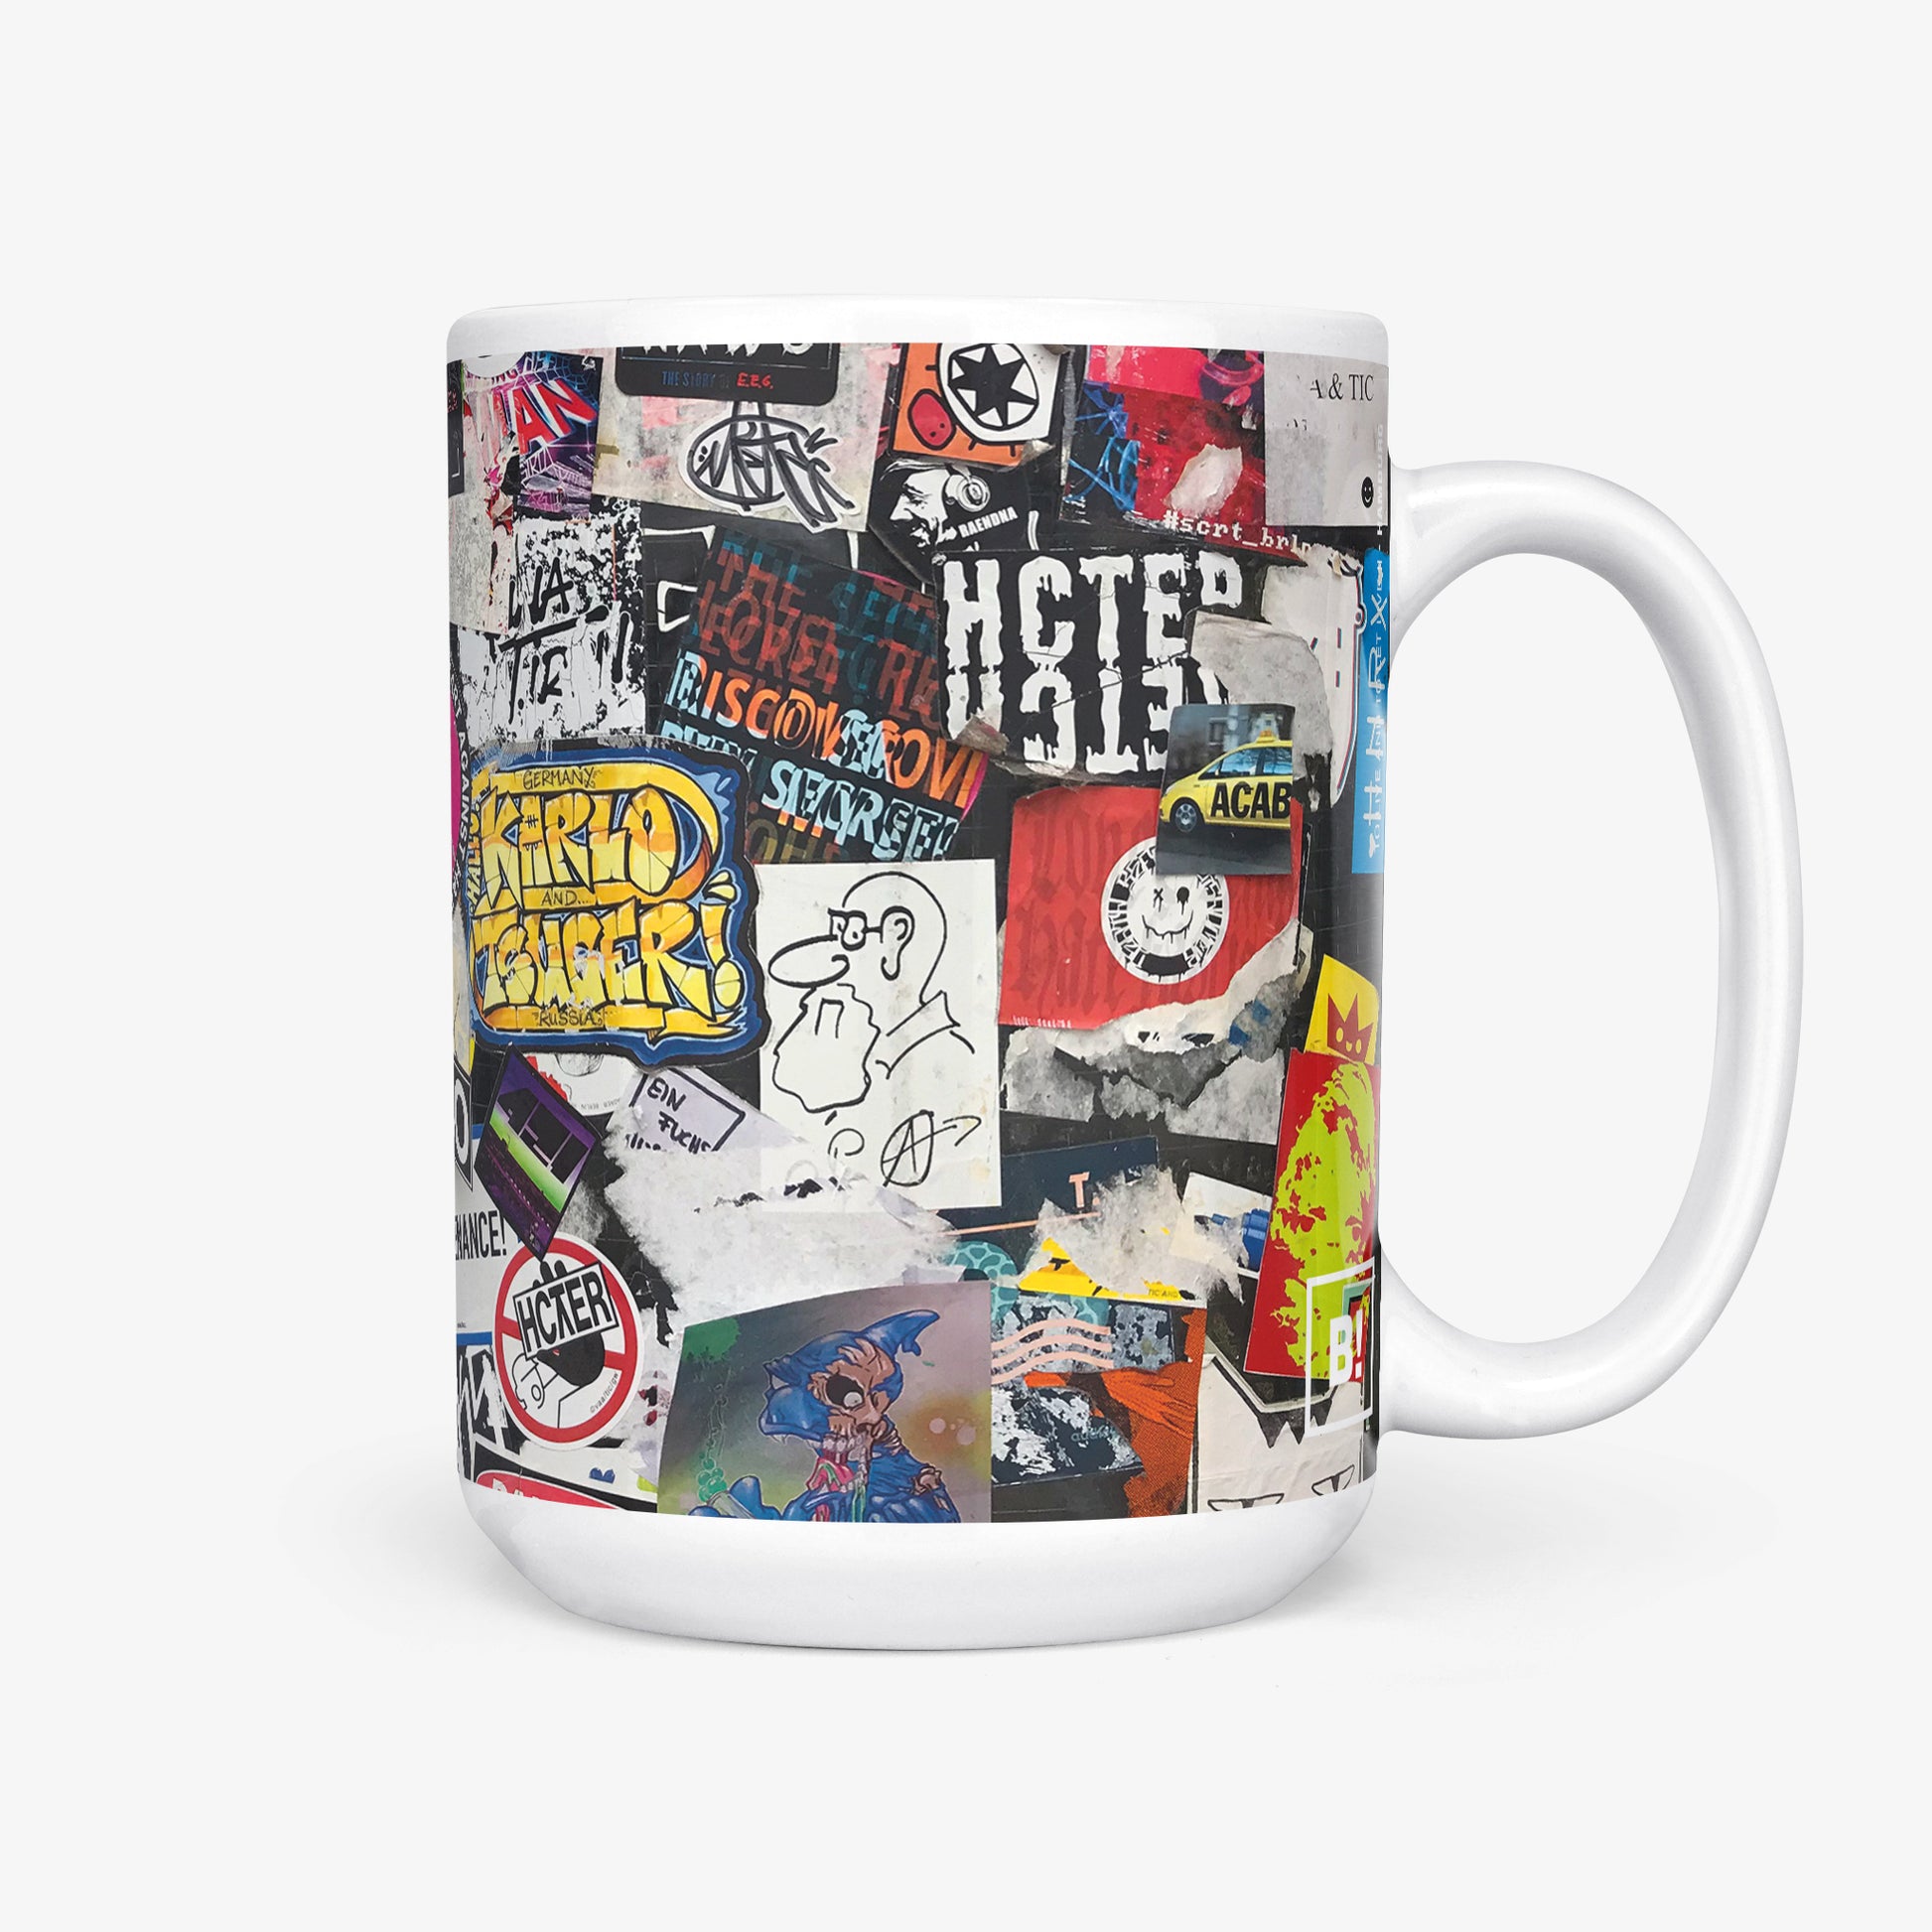 Be inspired by our Urban Art Coffee Mug – To Live And Let Live - No2 from Hamburg. Featuring a 15oz size with the handle on the right. The urban billboard design lends an authentic urban feel to the mug, making it resemble a piece of street art itself.